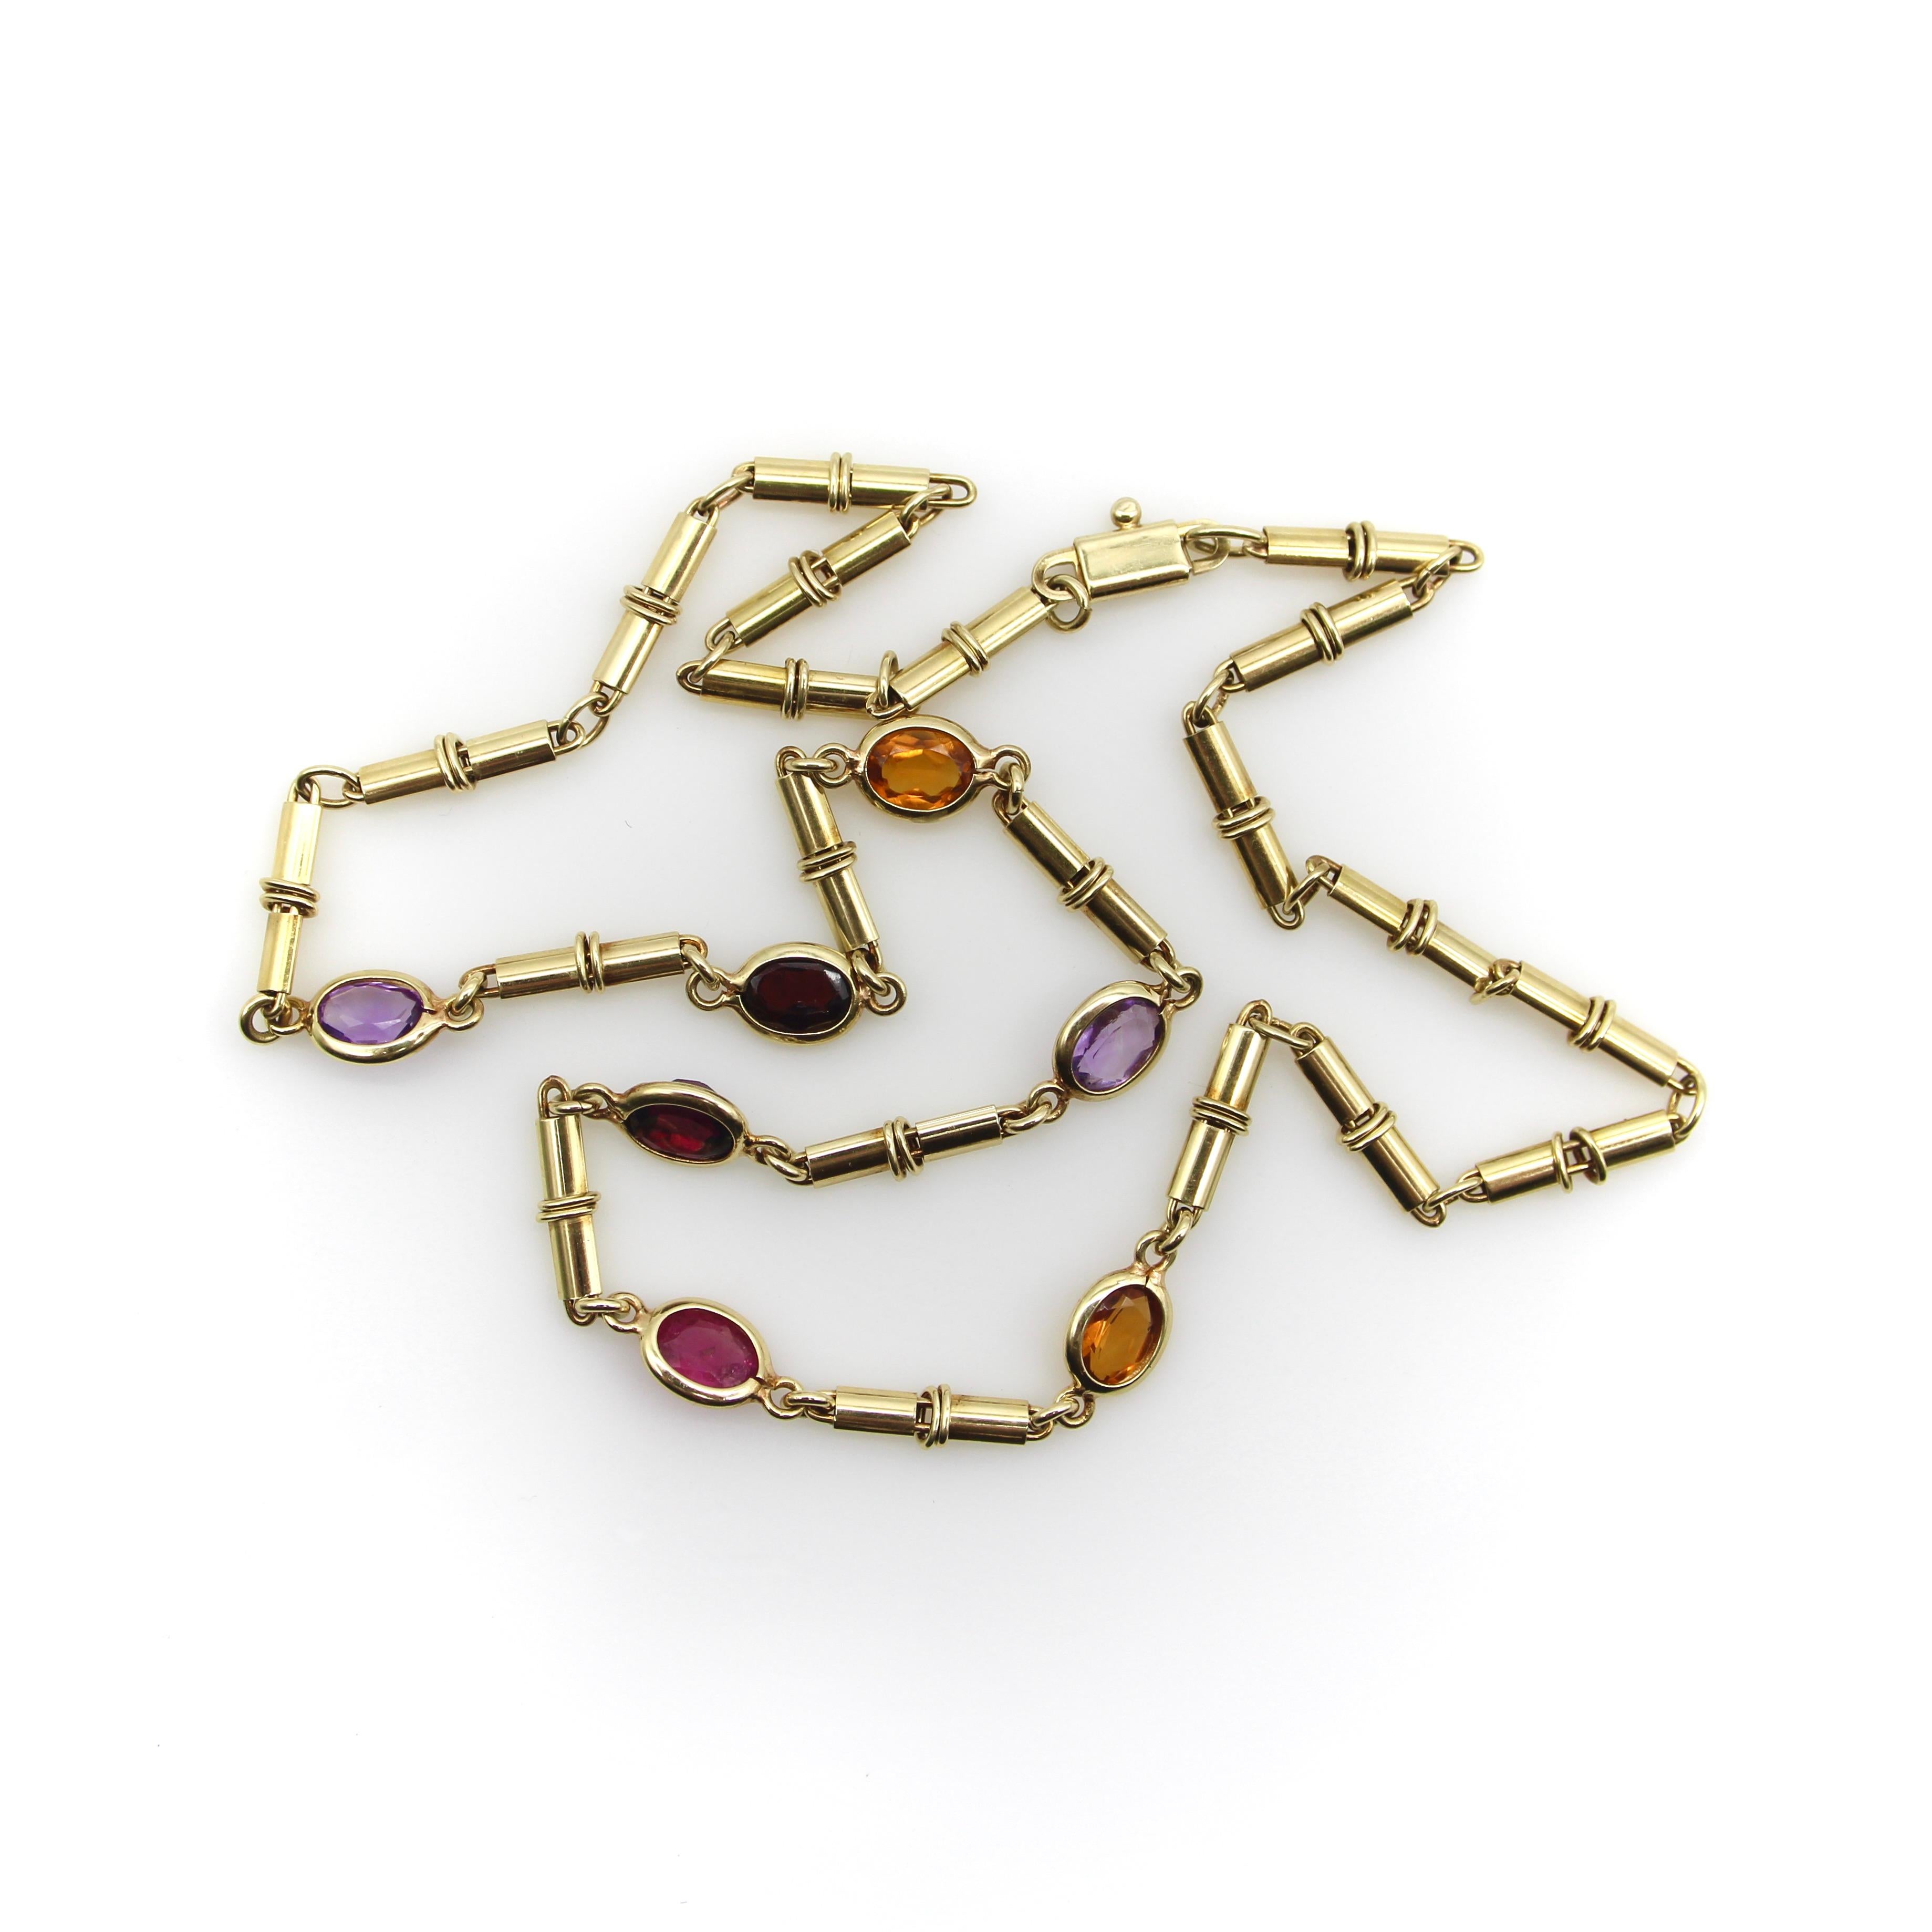 This 14k gold vintage Italian necklace features seven bezel set stones of various colors, providing a rainbow of gems. The stones are connected by elongated tubelike links, creating an intricate texture that looks fantastic layered with other